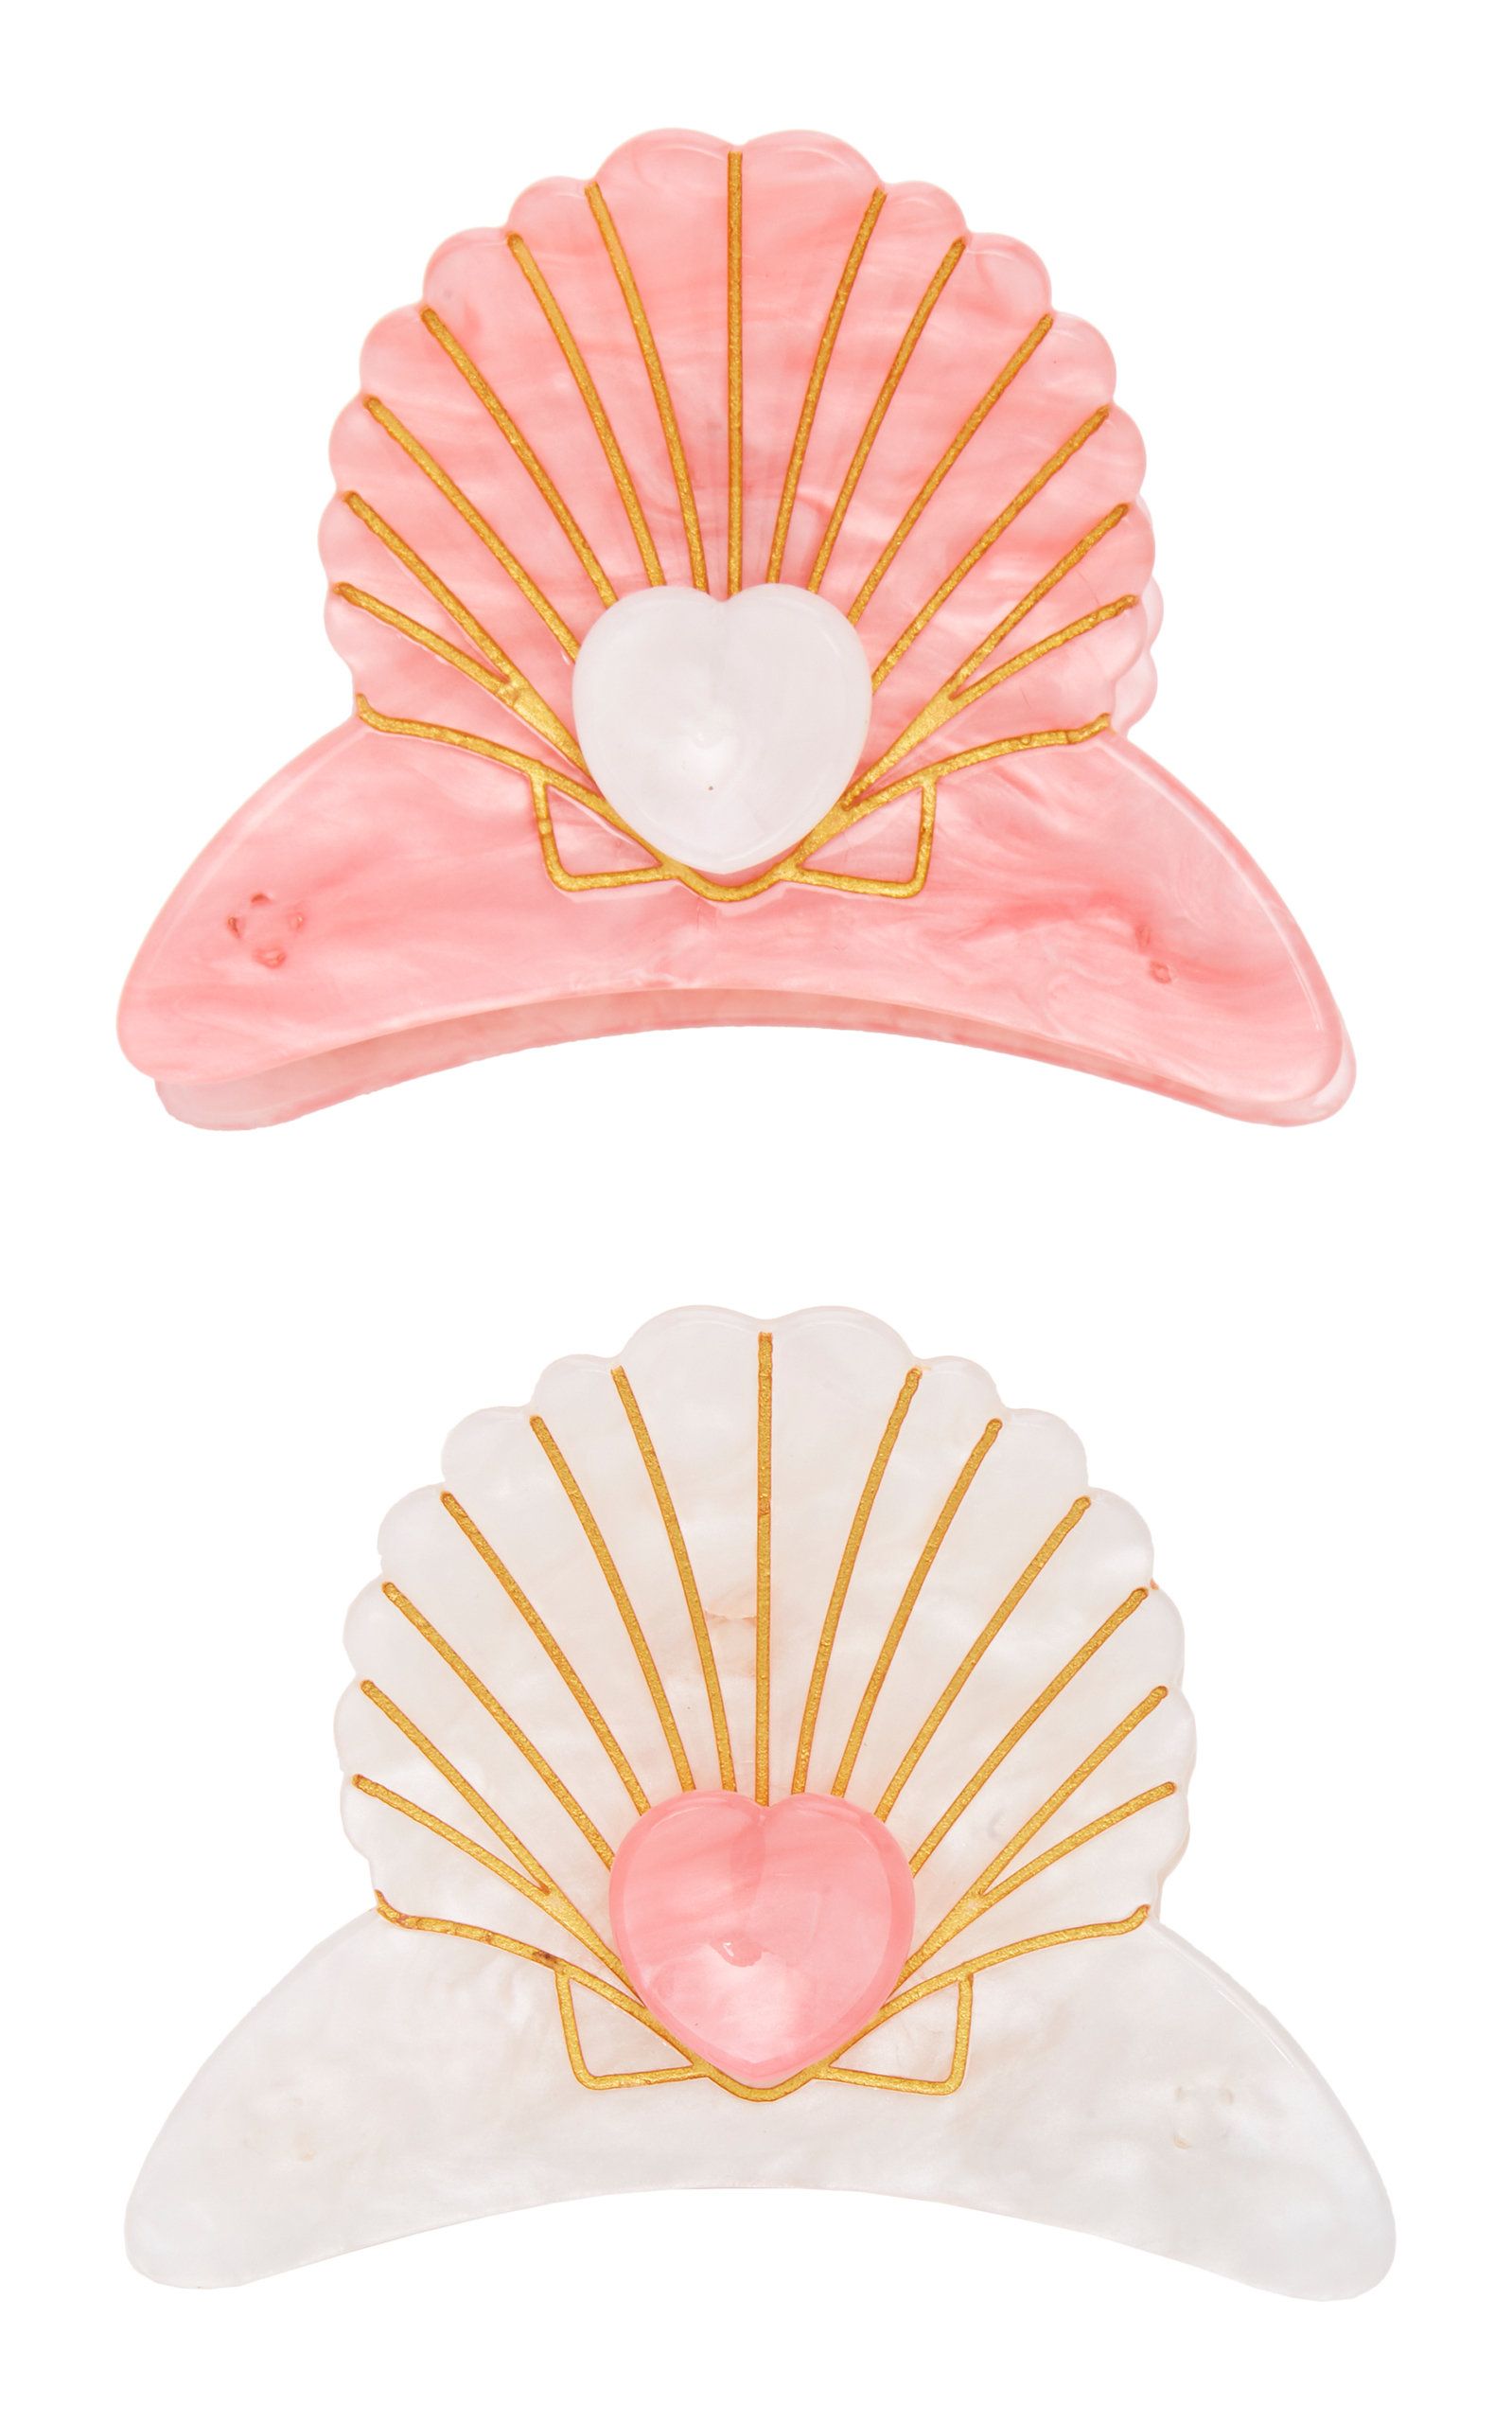 https://hips.hearstapps.com/vader-prod.s3.amazonaws.com/1590597650-large_margherita-pink-delphine-set-of-two-hair-clips.jpg?crop=1xw:1xh;center,top